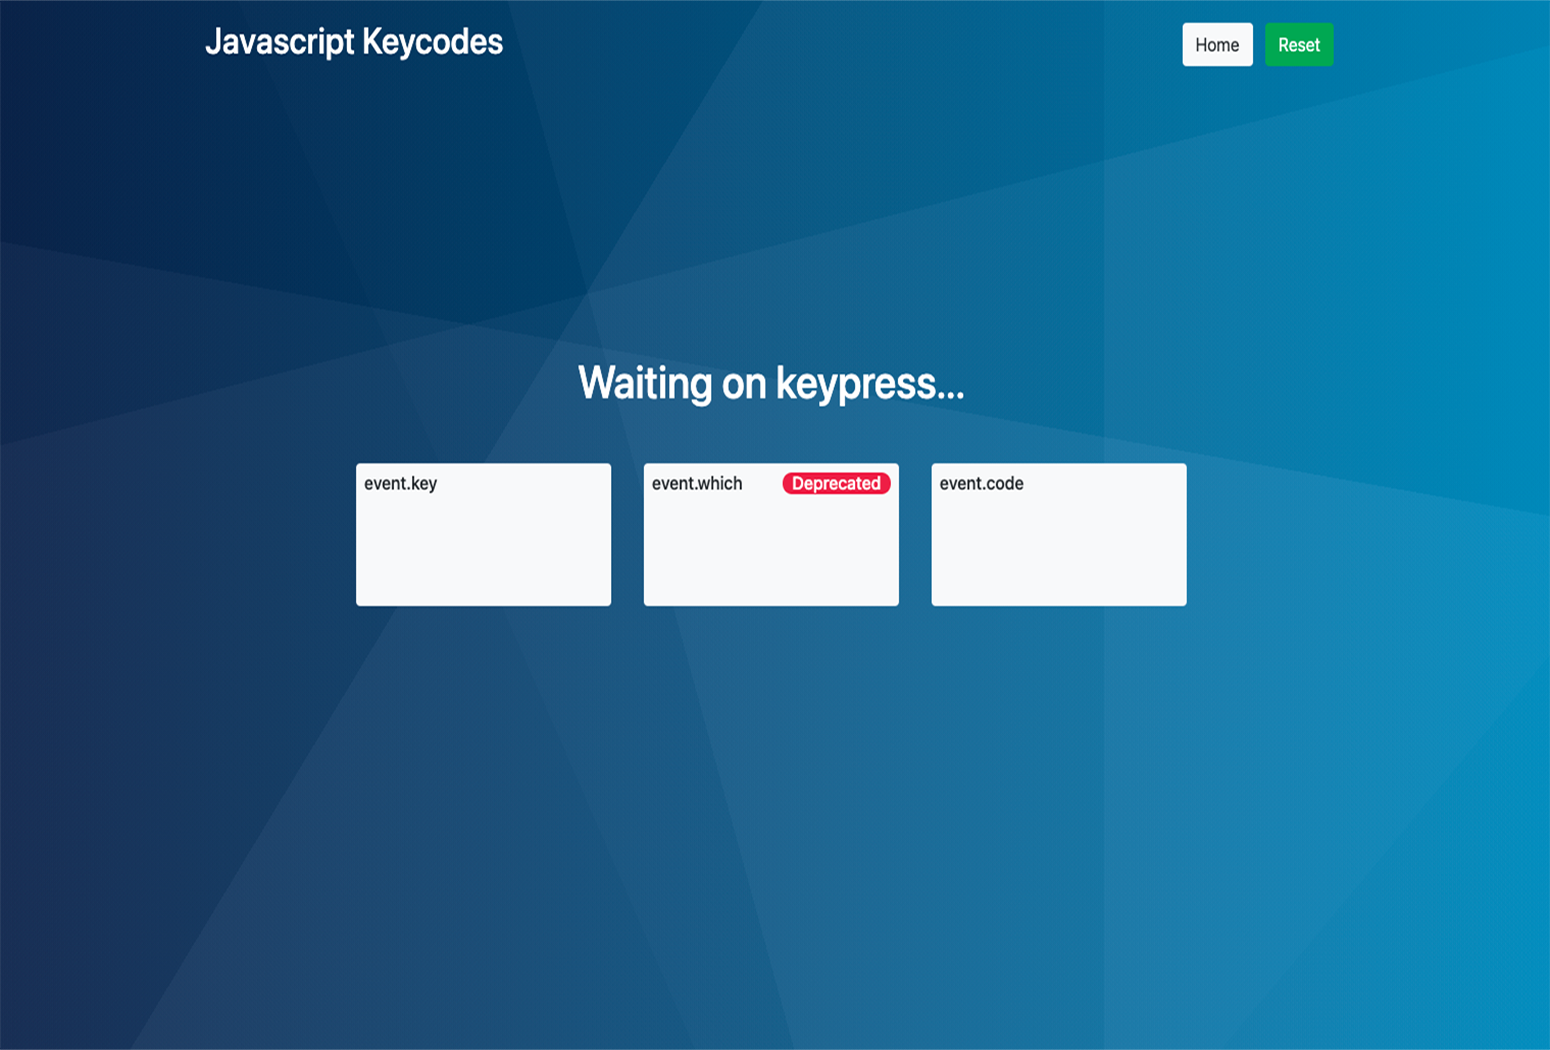 Javascript Keycodes Event Tool, a creation by Cav Lemasters